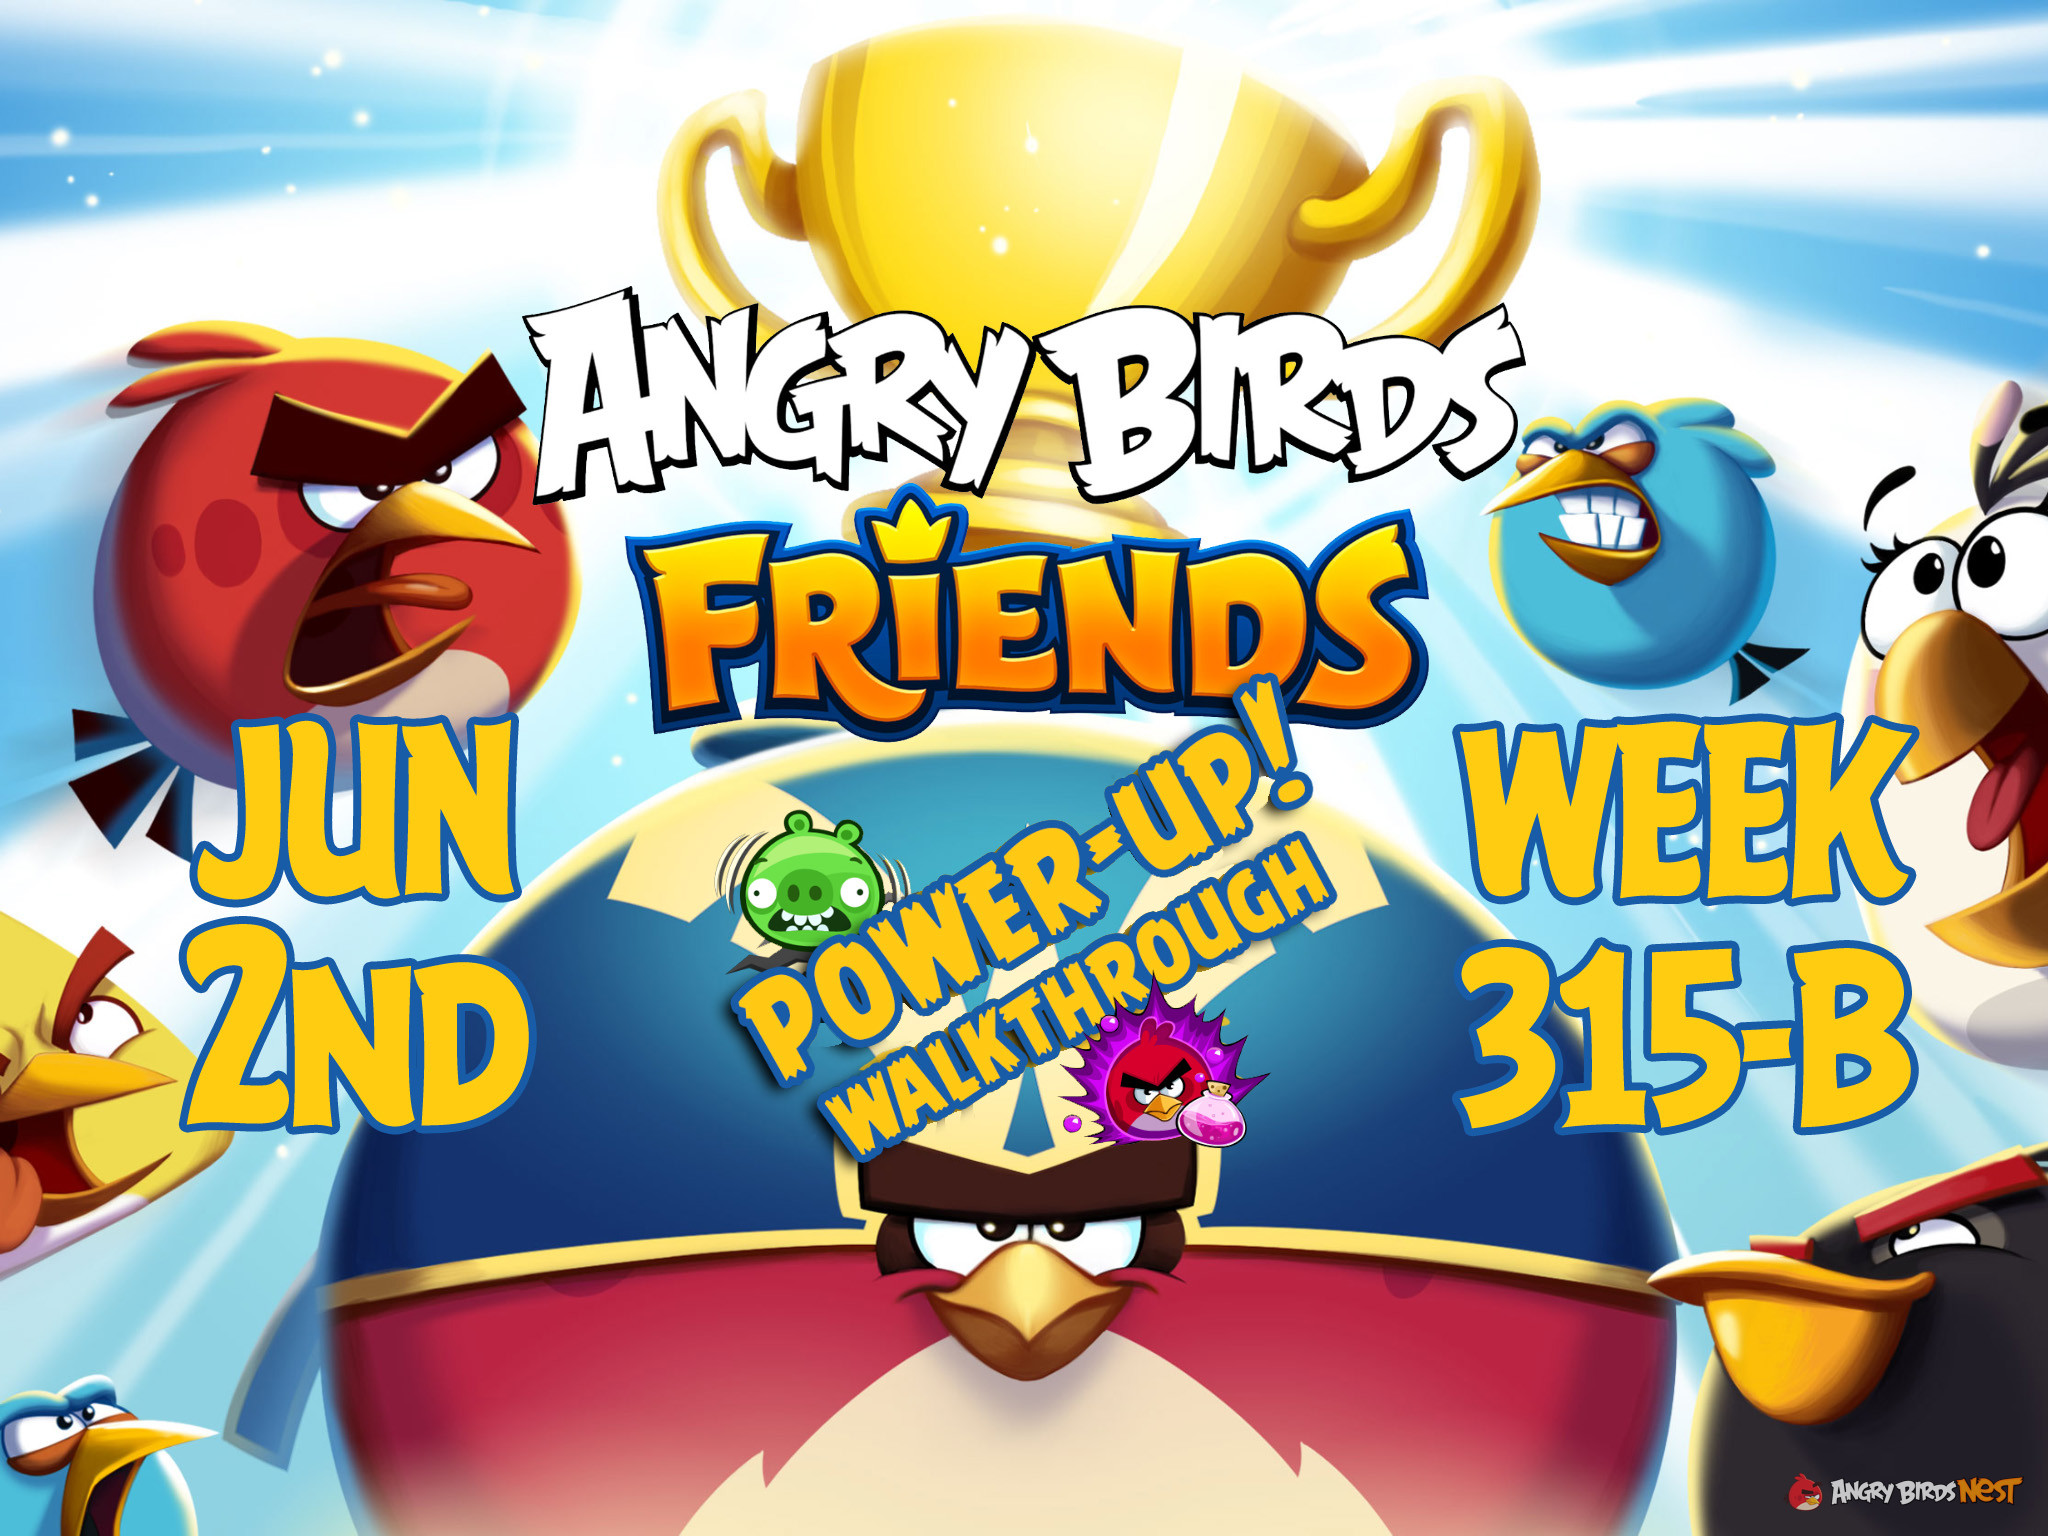 Angry Birds Friends Tournament Week 315-B Feature Image PU